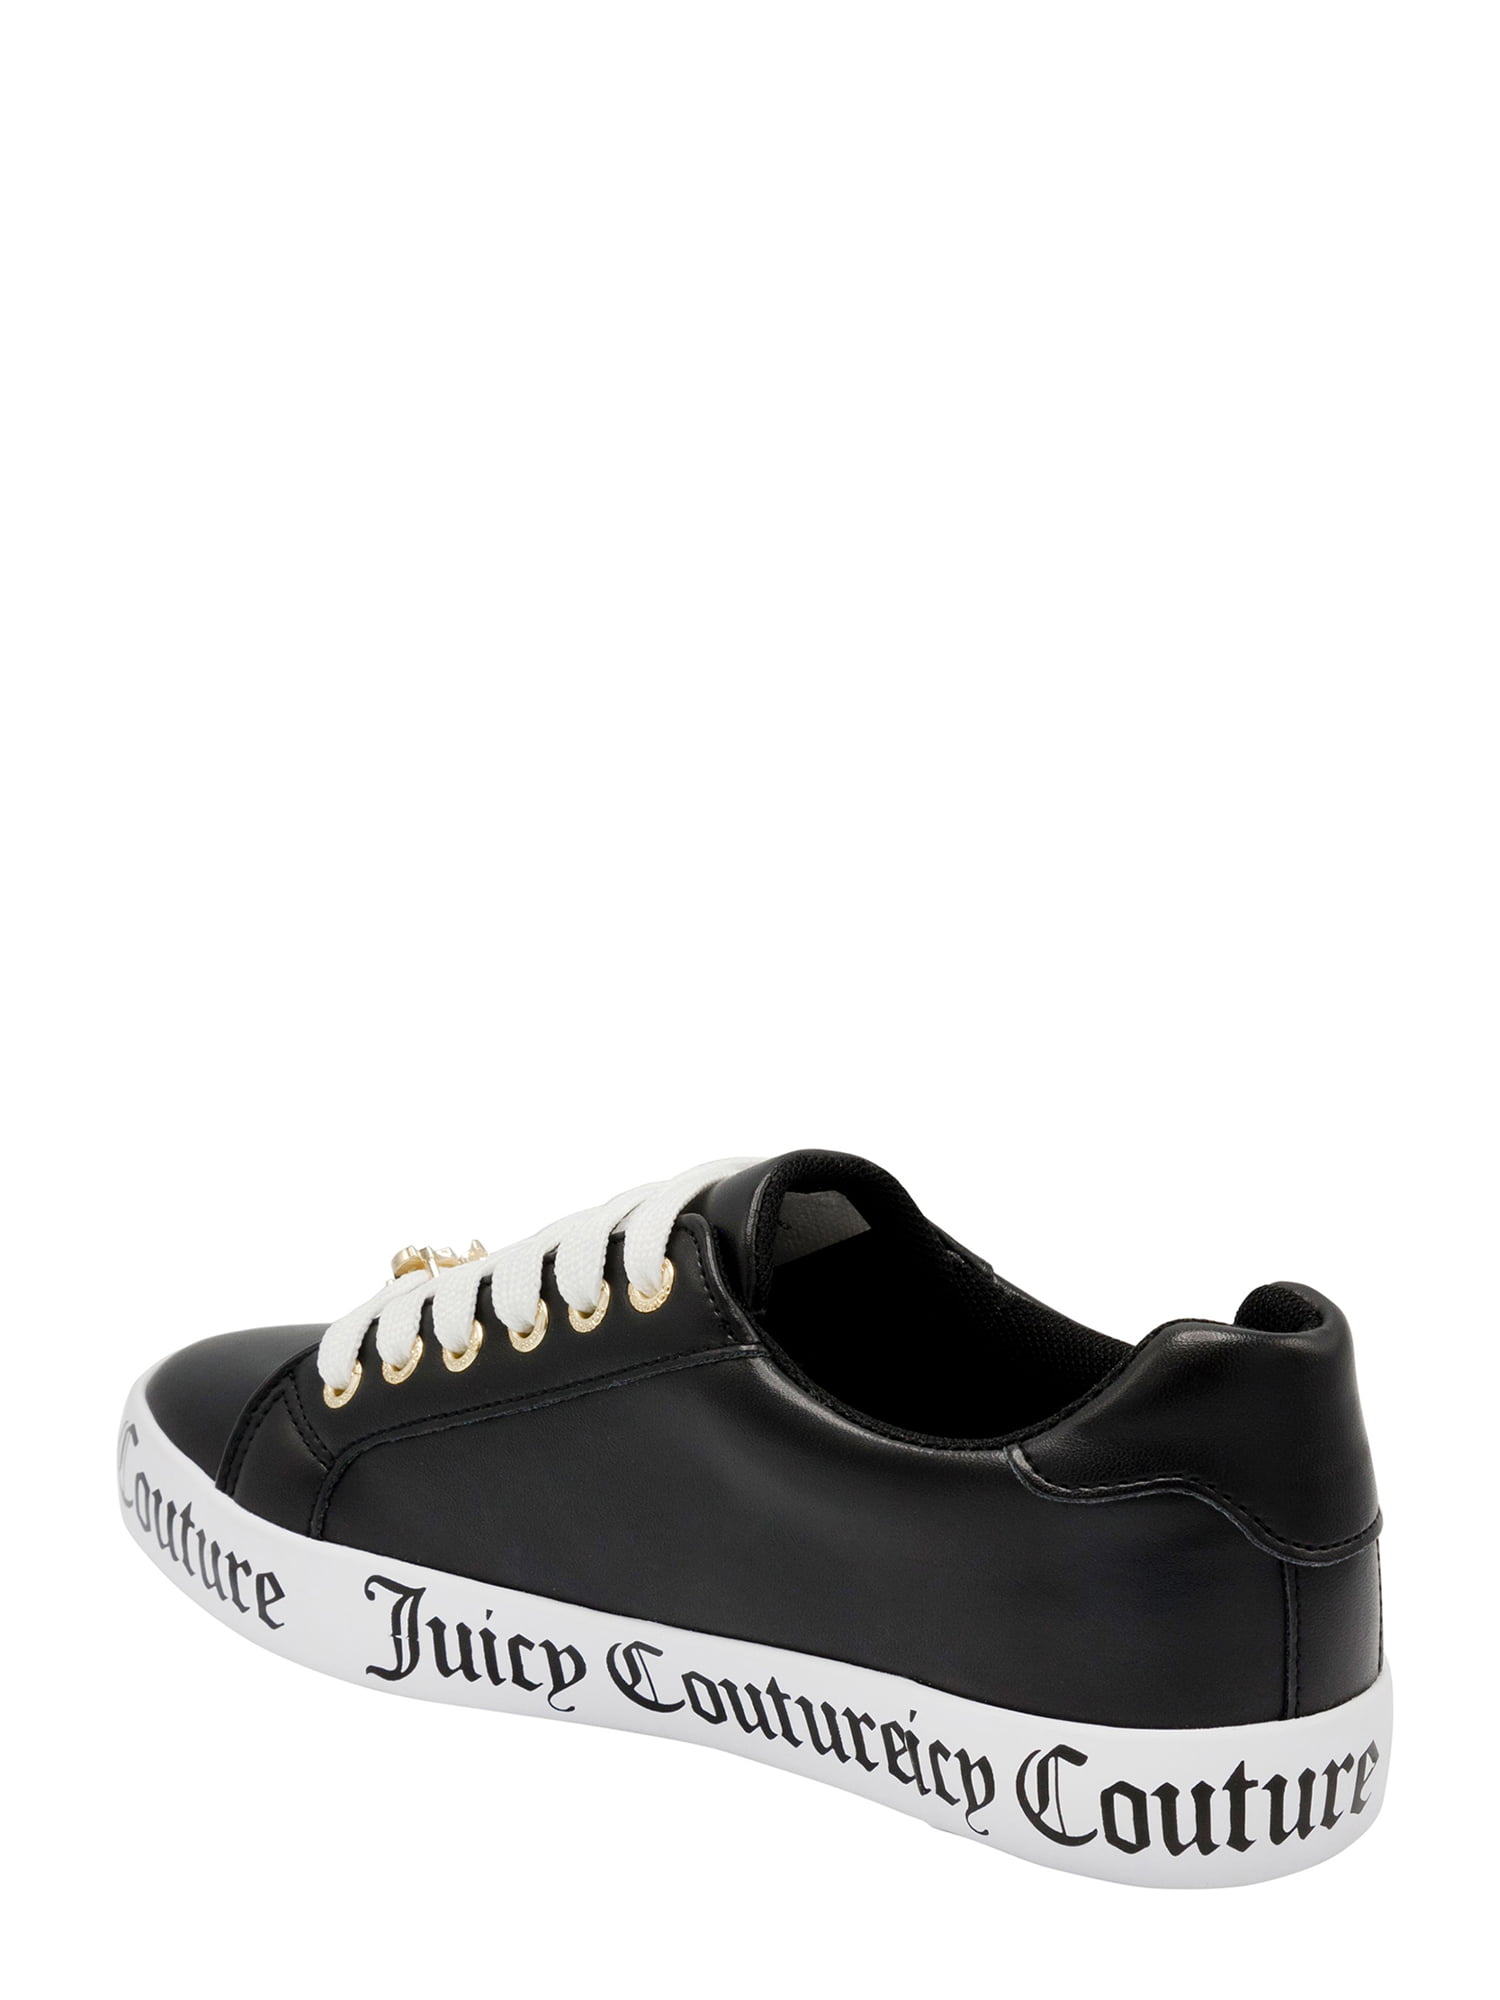 JUICY COUTURE Women's sneakers | Leopard fashion, Slip on sneakers, Juicy  couture